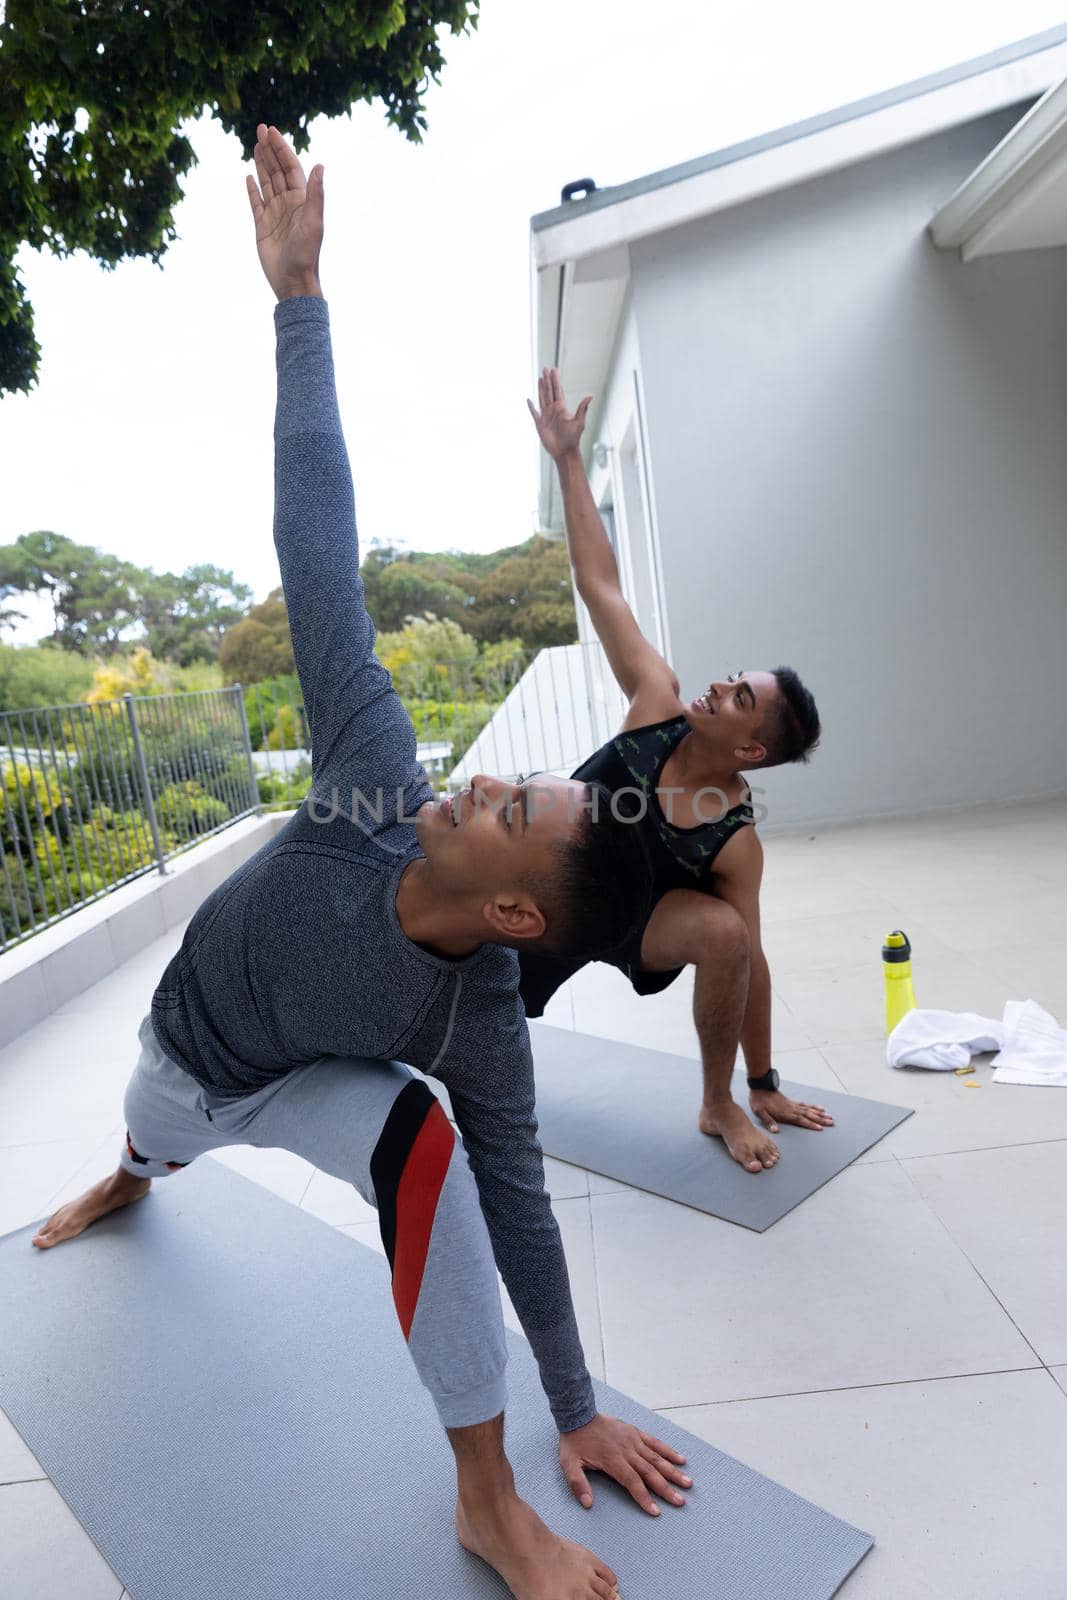 Diverse gay male couple practicing yoga on balcony. staying at home in isolation during quarantine lockdown.